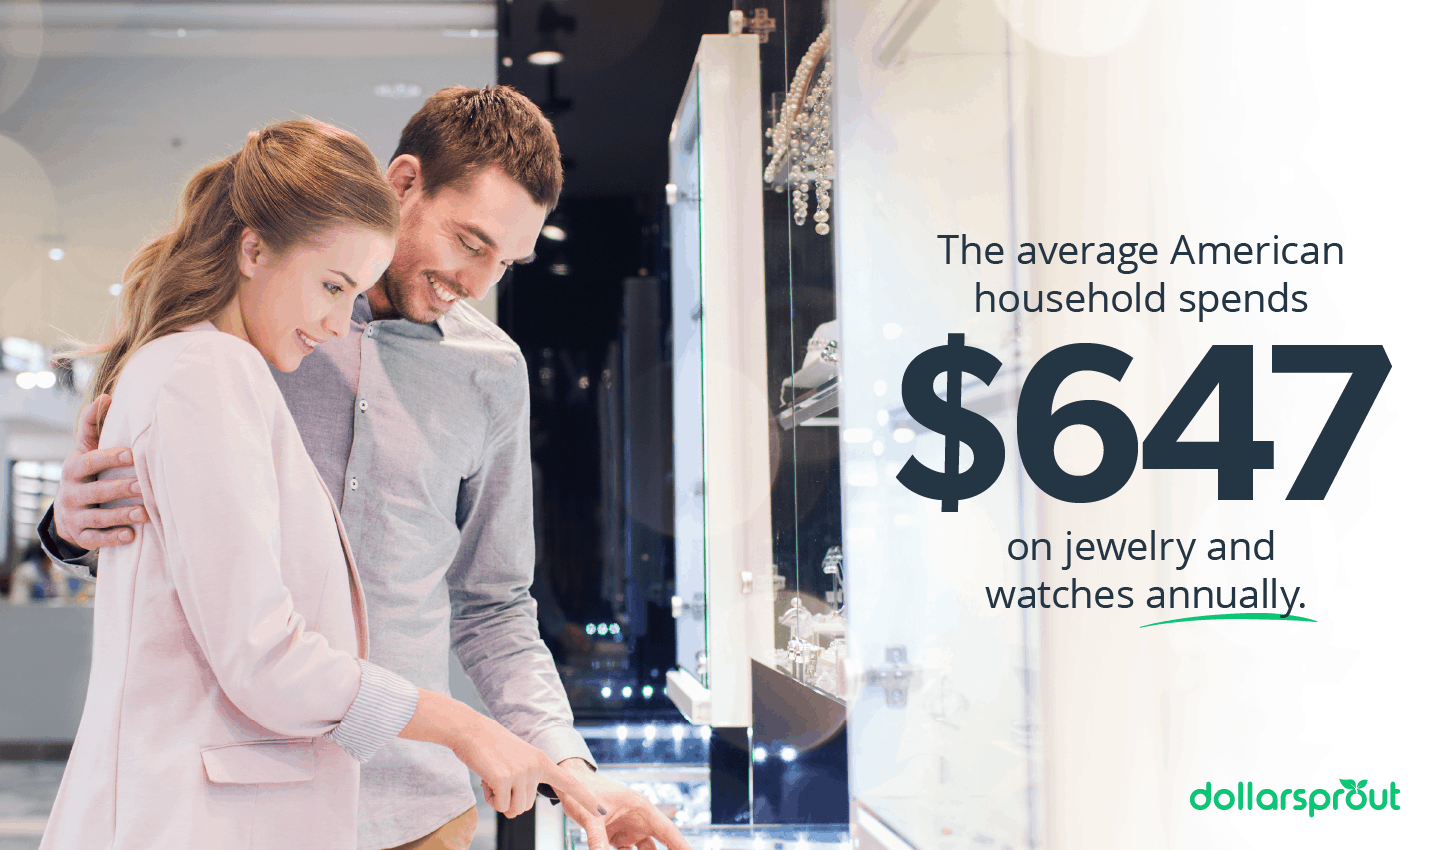 Average annual spending on jewelry and watches per household